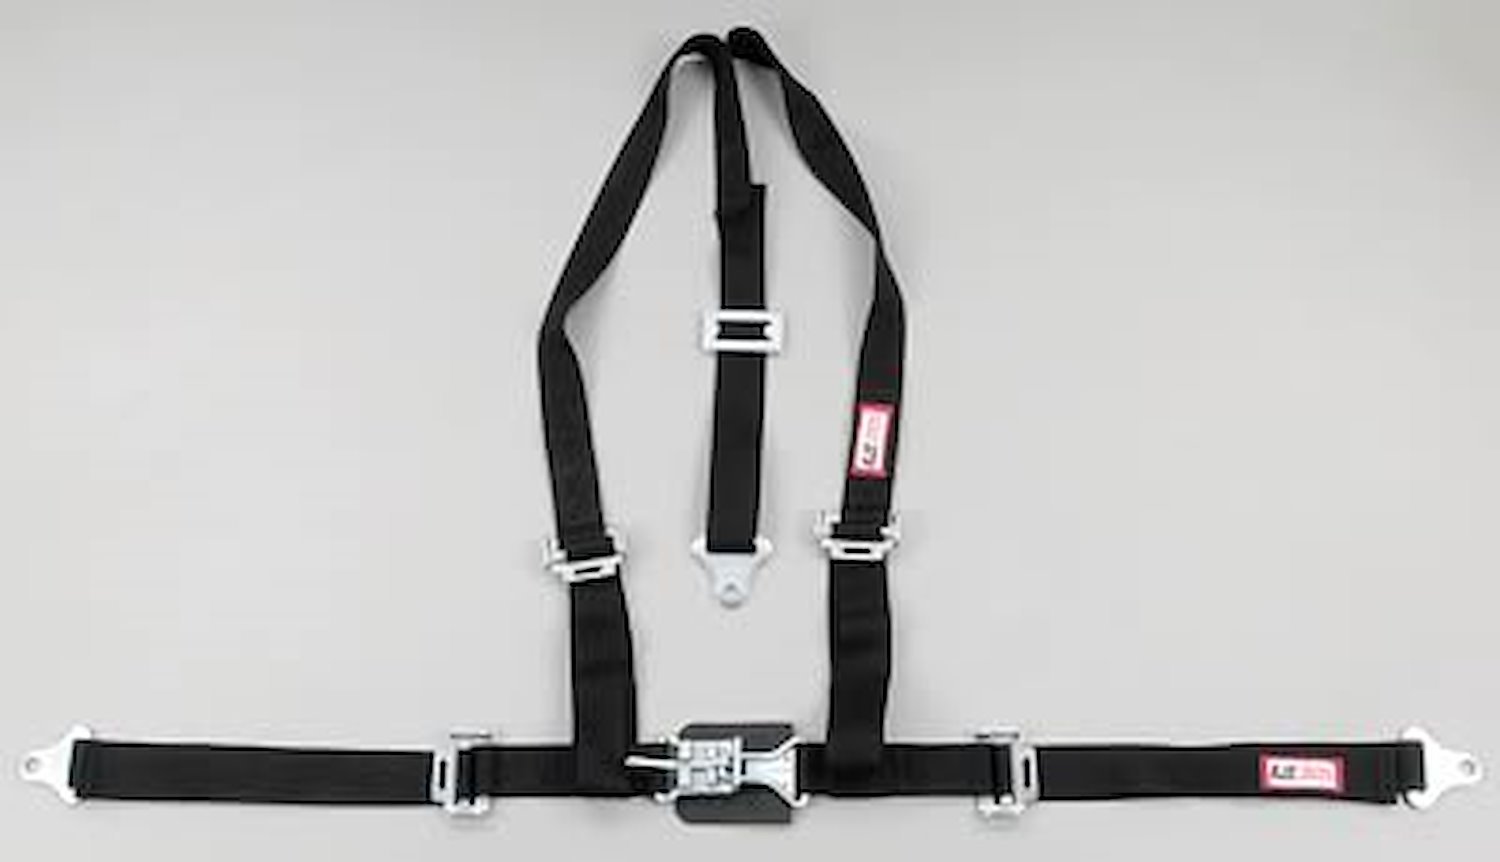 NON-SFI L&L HARNESS 3 PULL UP Lap Belt SEWN IN 2 Shoulder Harness V ROLL BAR Mount w/STERNUM STRAP ALL BOLT ENDS RED